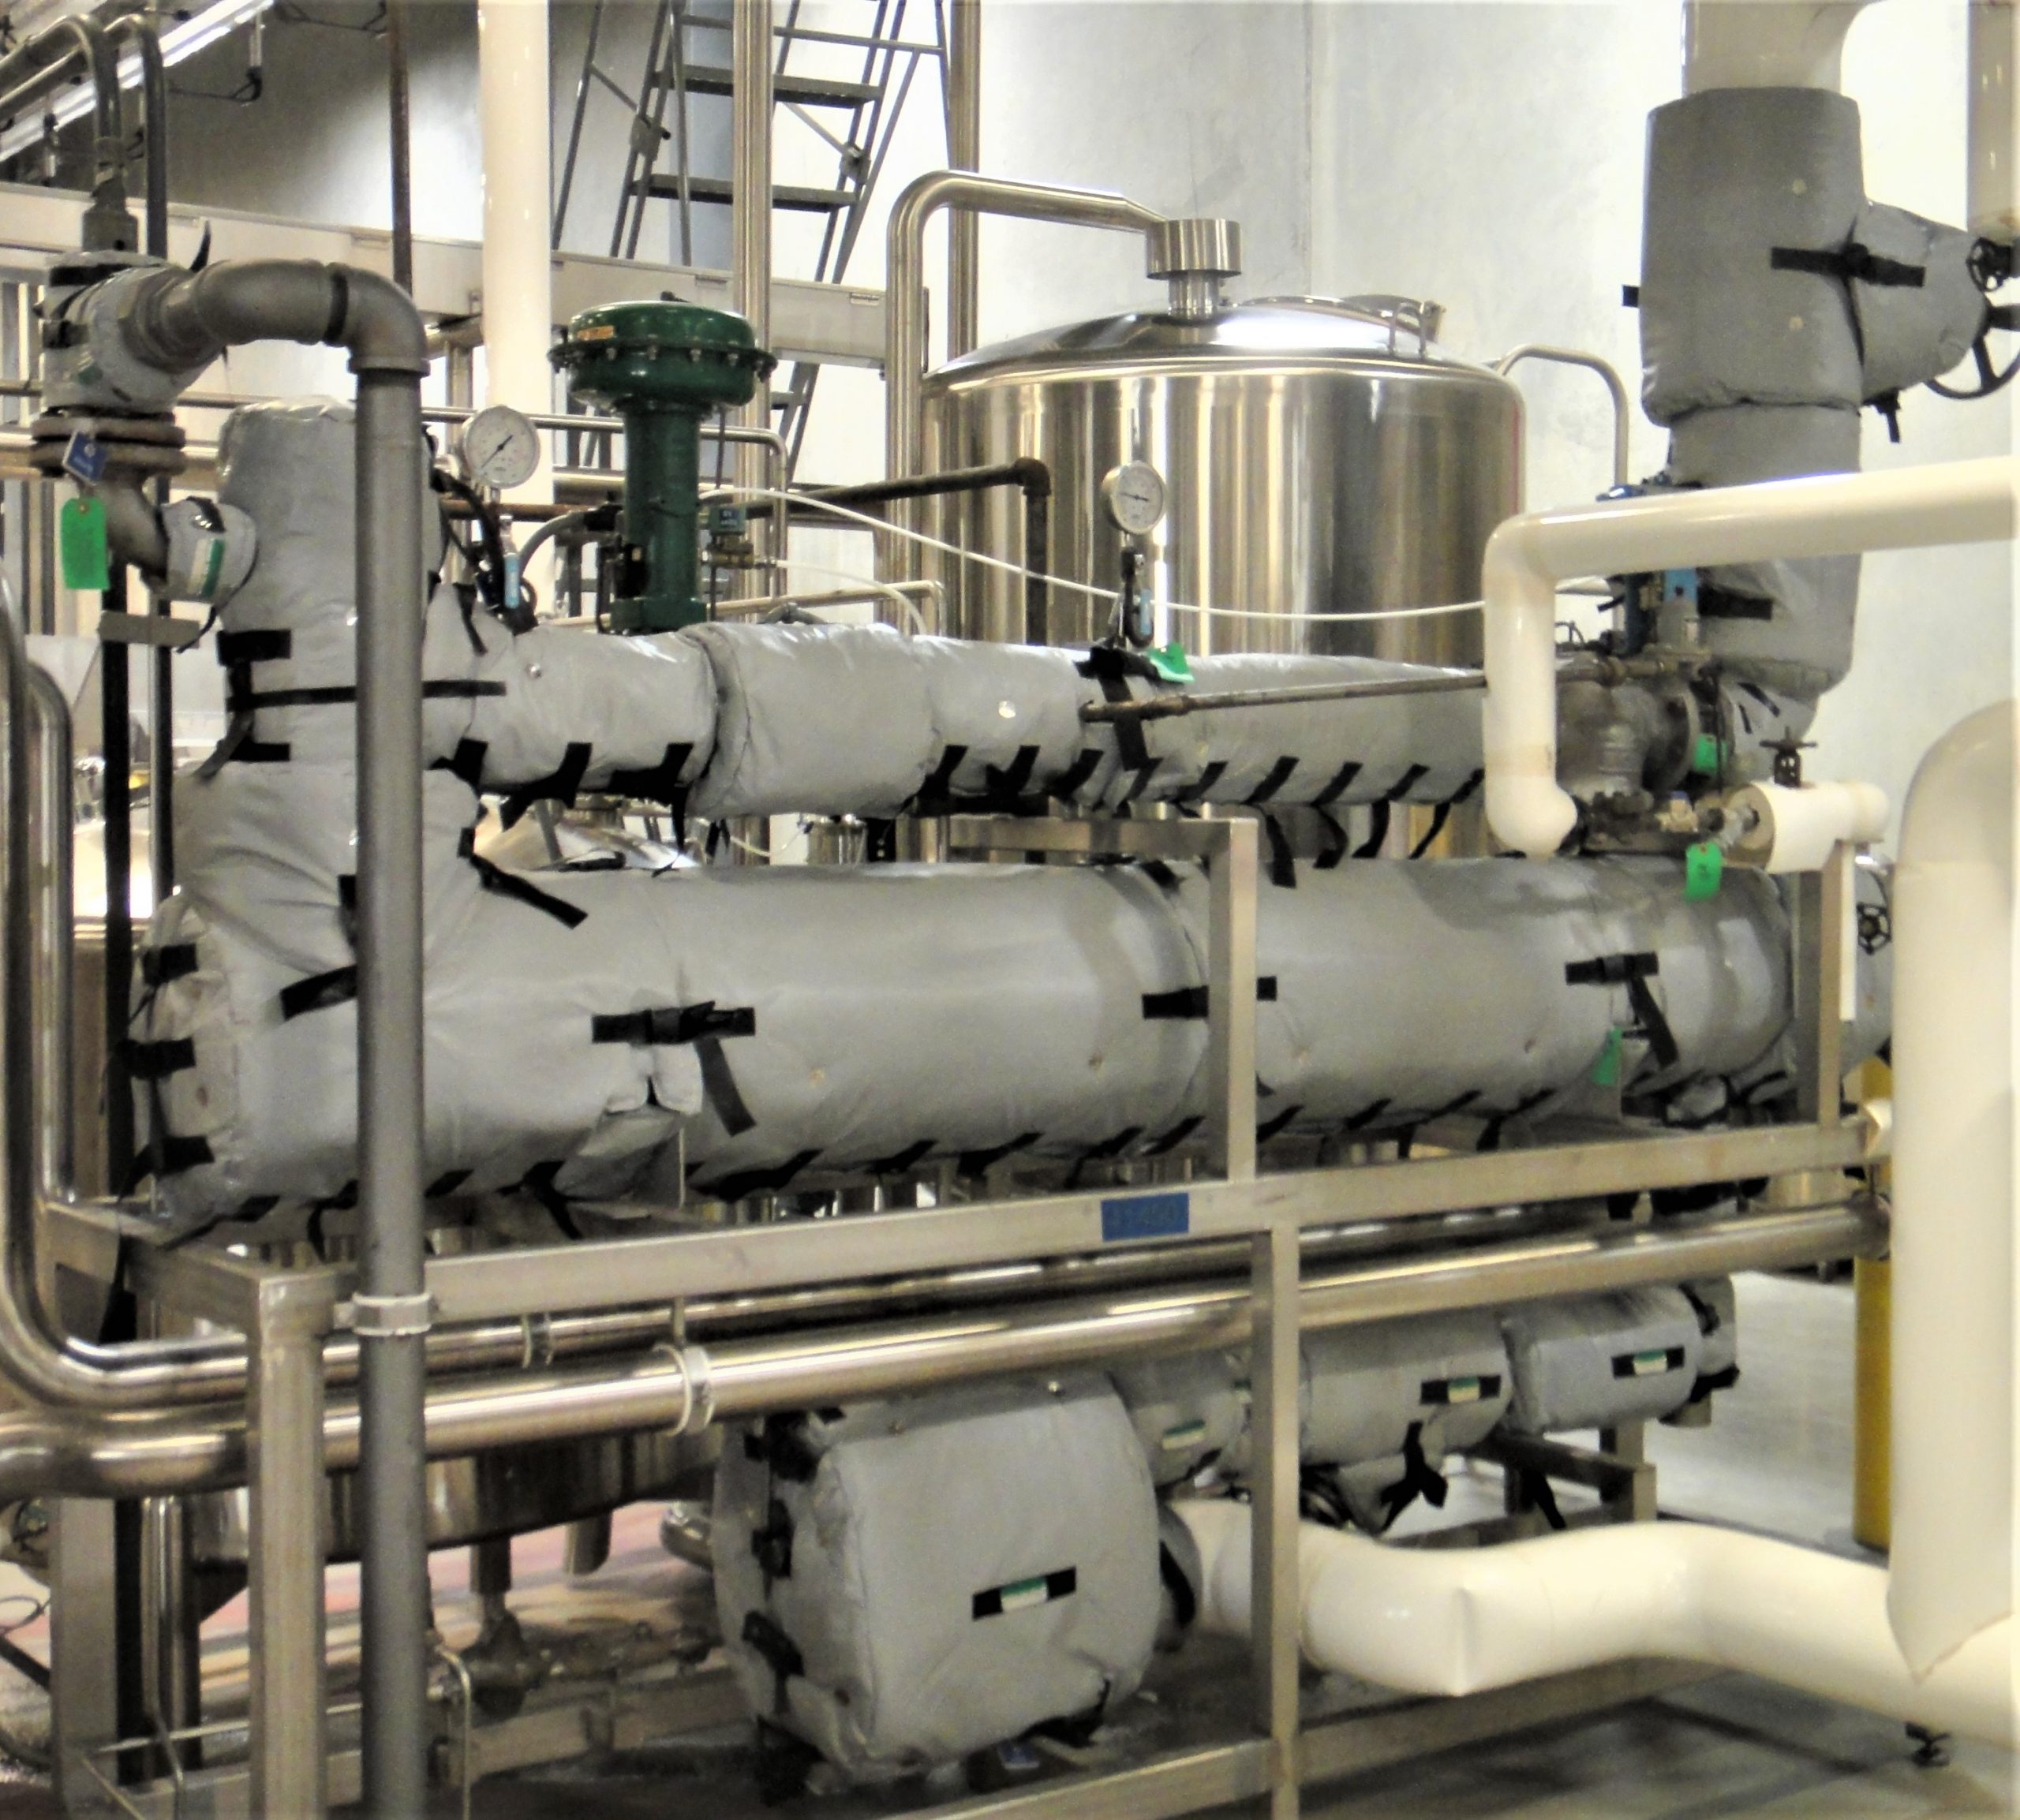 Shell Tube Pasteurizer in food processing facility with Shannon thermal insulation blankets